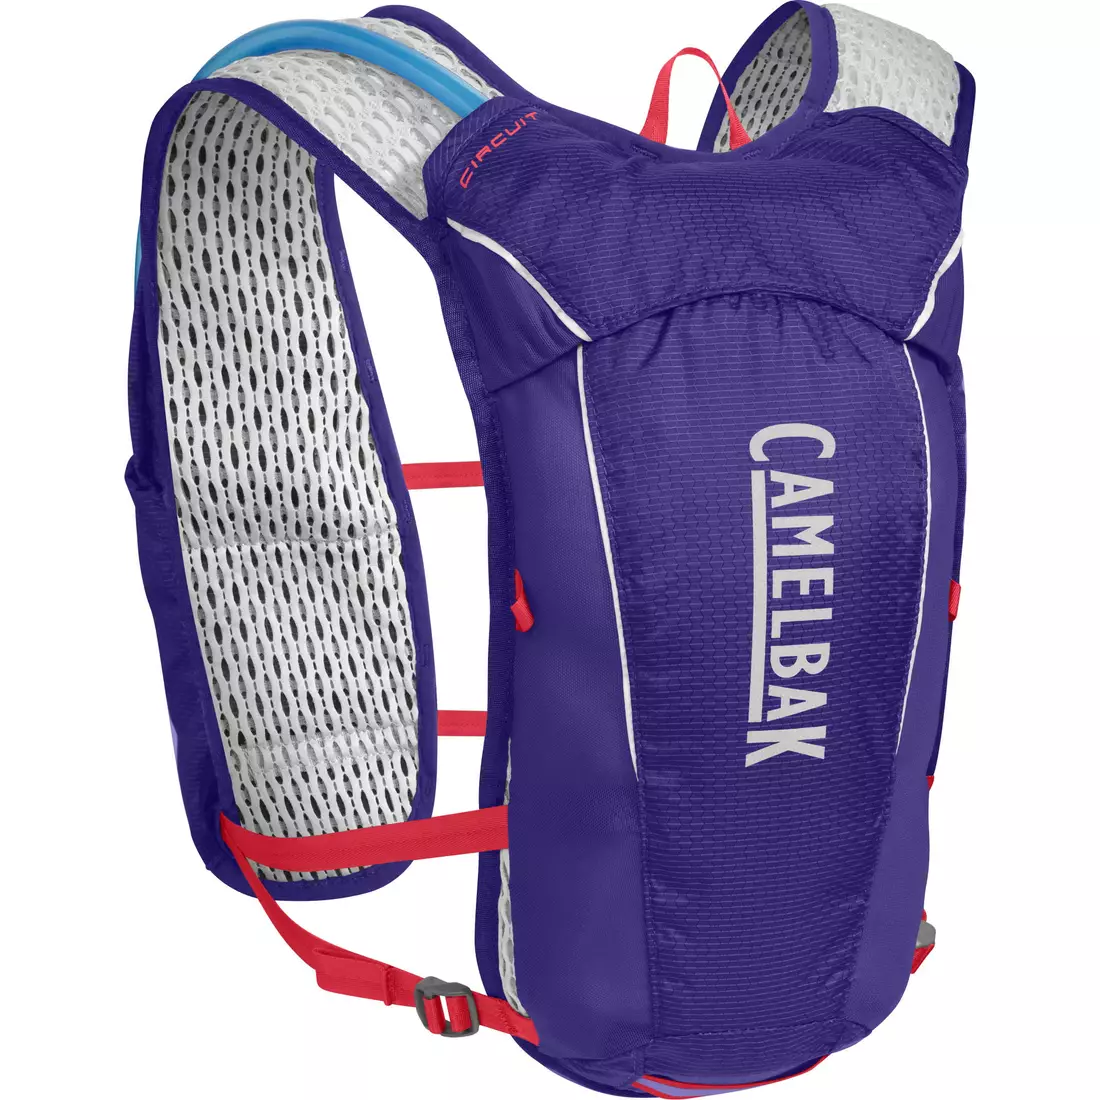 Camelbak SS17 backpack / running vest with bladder Circuit Vest 50oz / 1.5L Deep Amethyst/Fiery Coral 1138402900